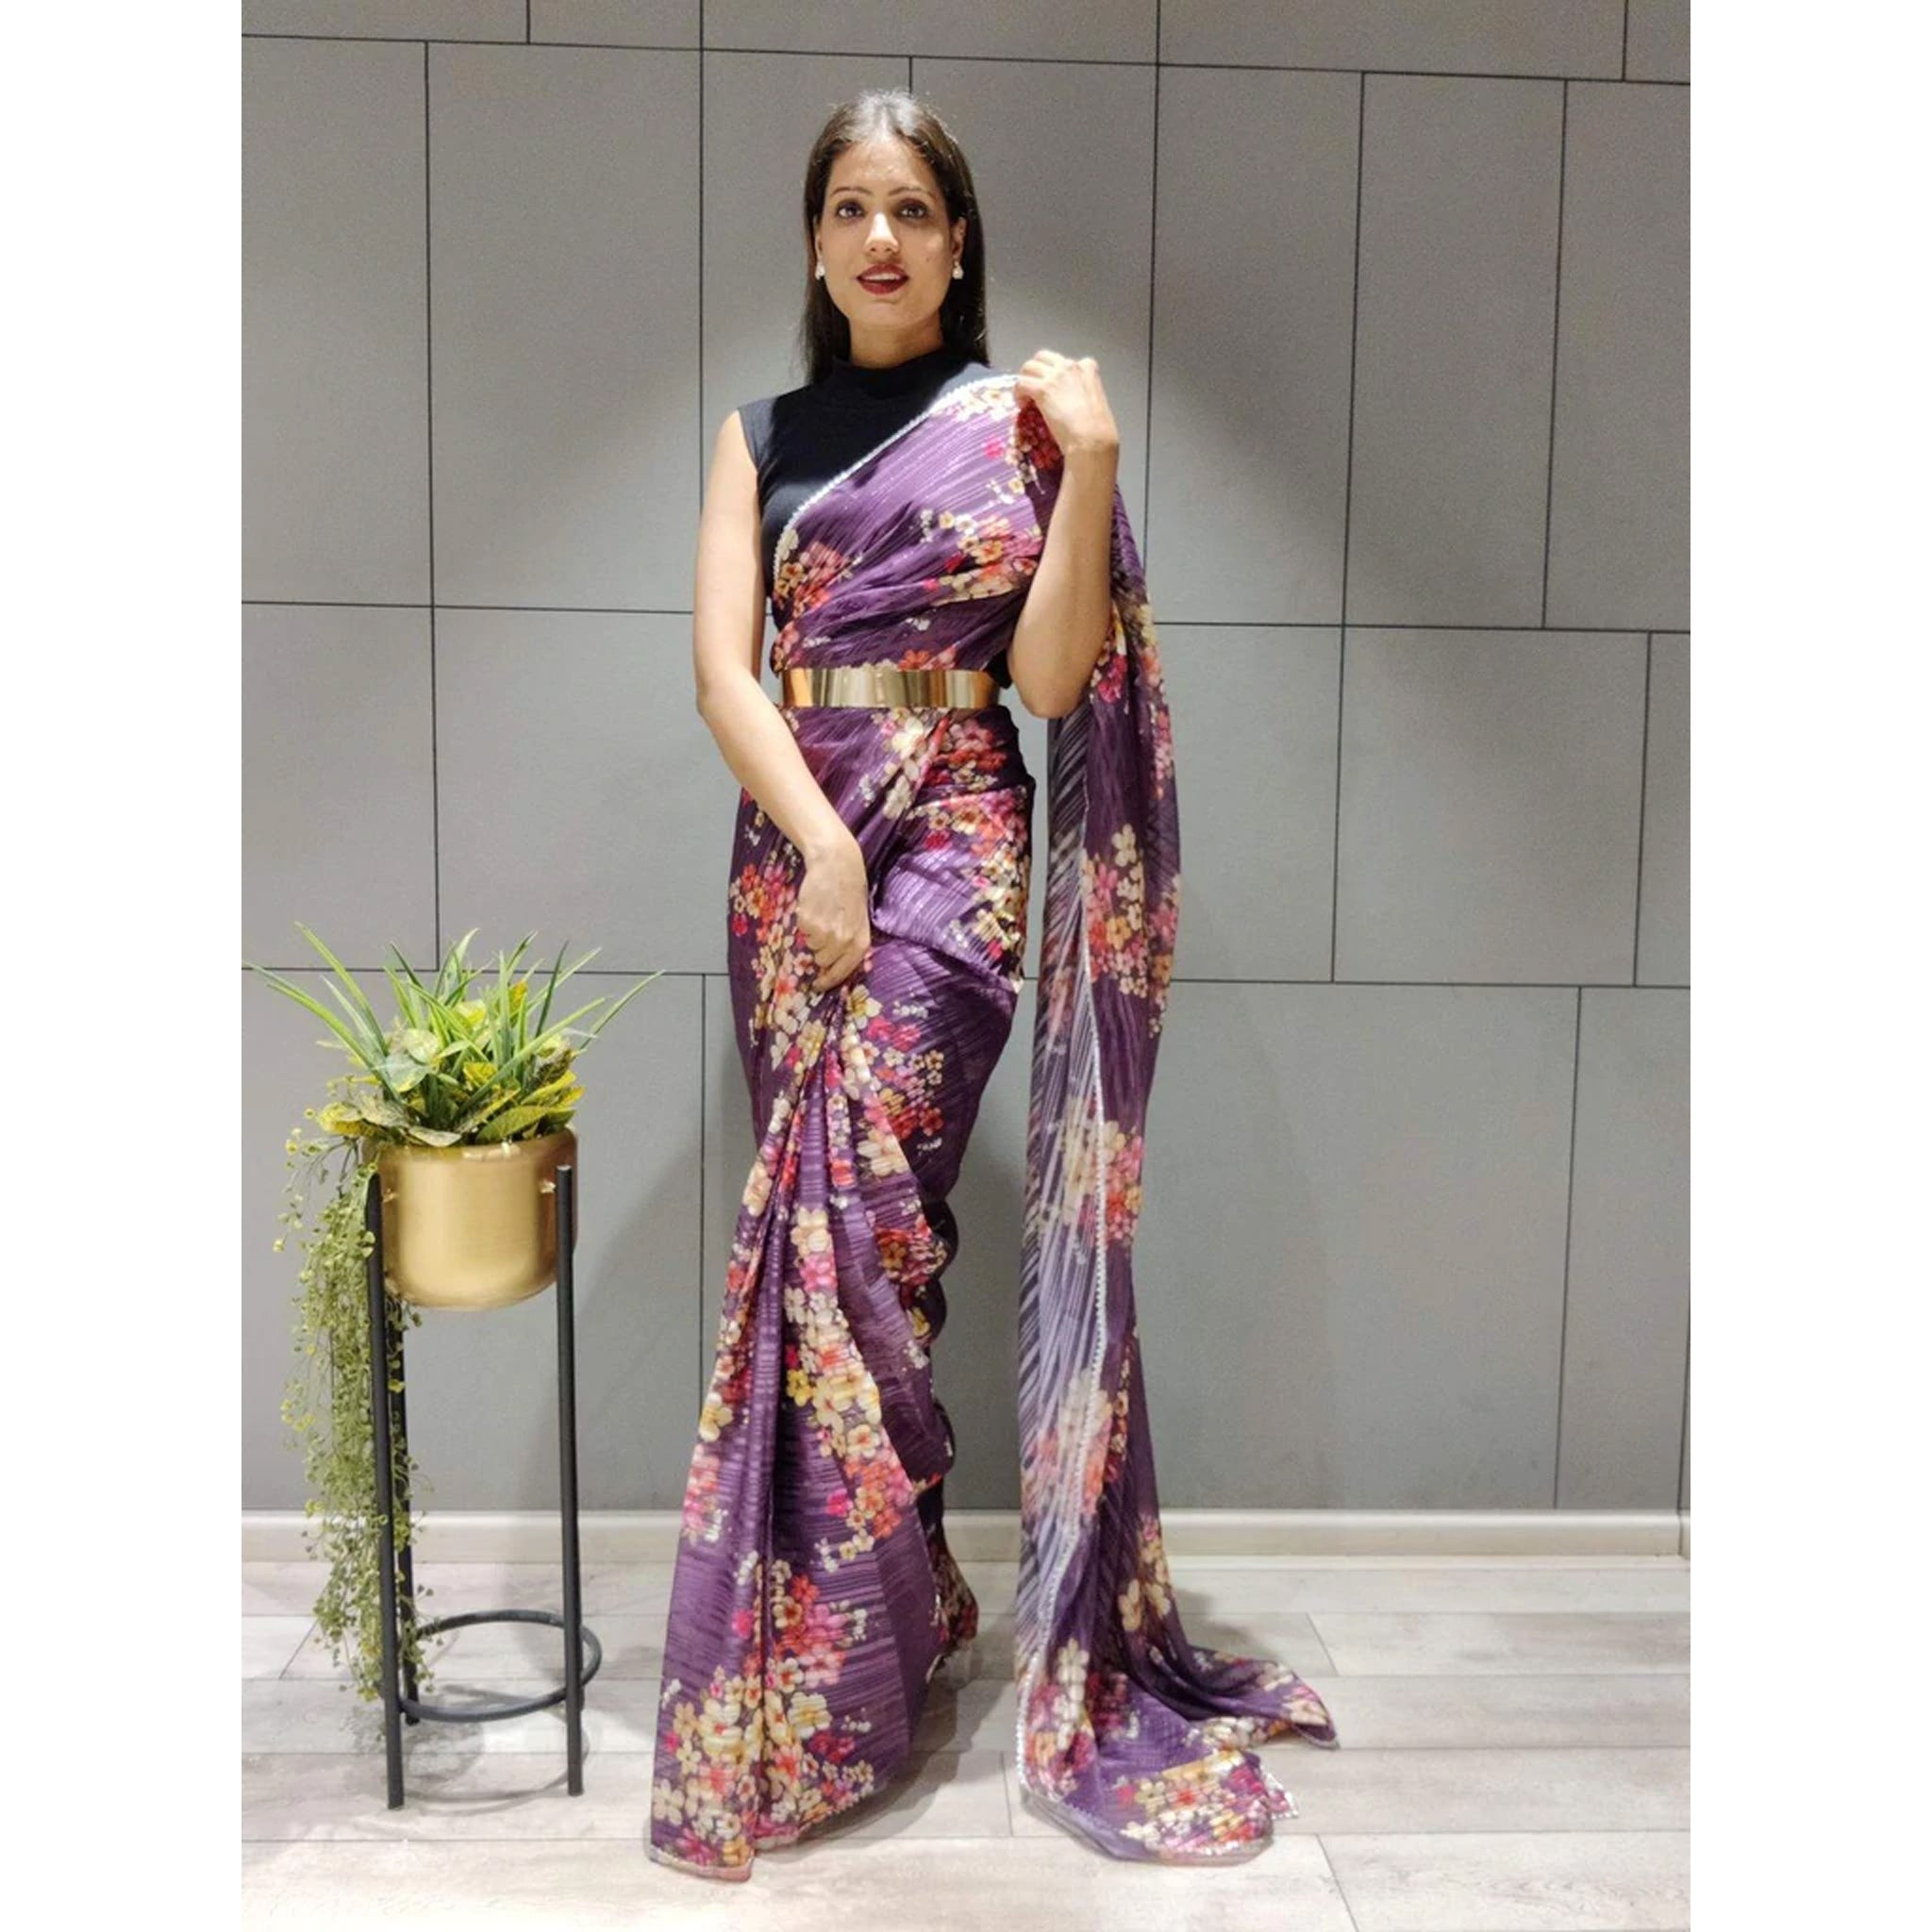 Flower Printed Ready to wear Chiffon Saree with Metal Belt - Colorful Saree